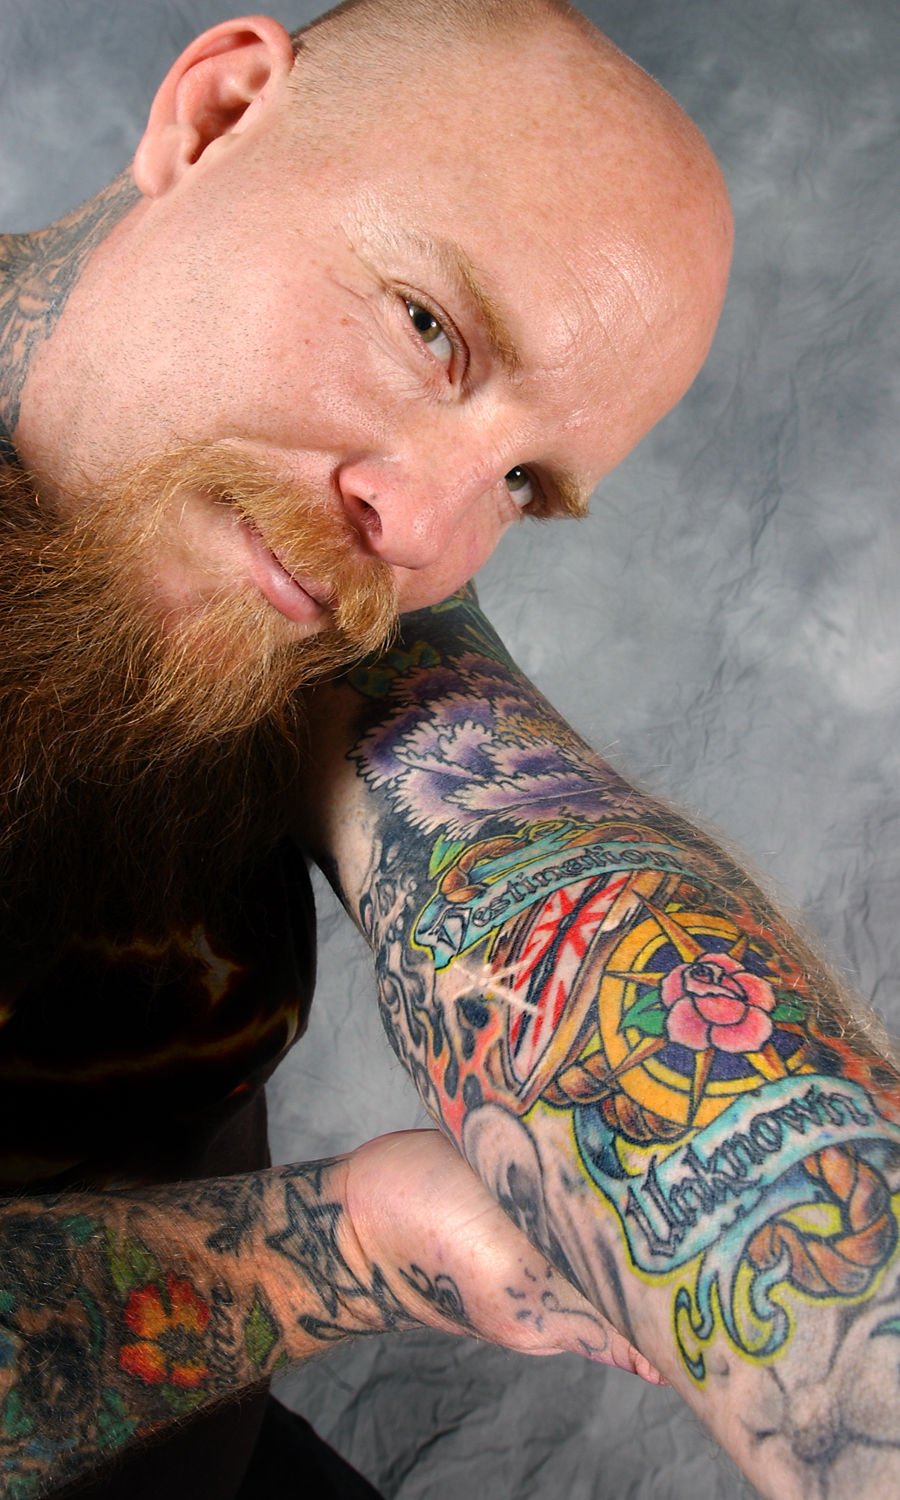 Local tattoo artist is in running for Ink Master title